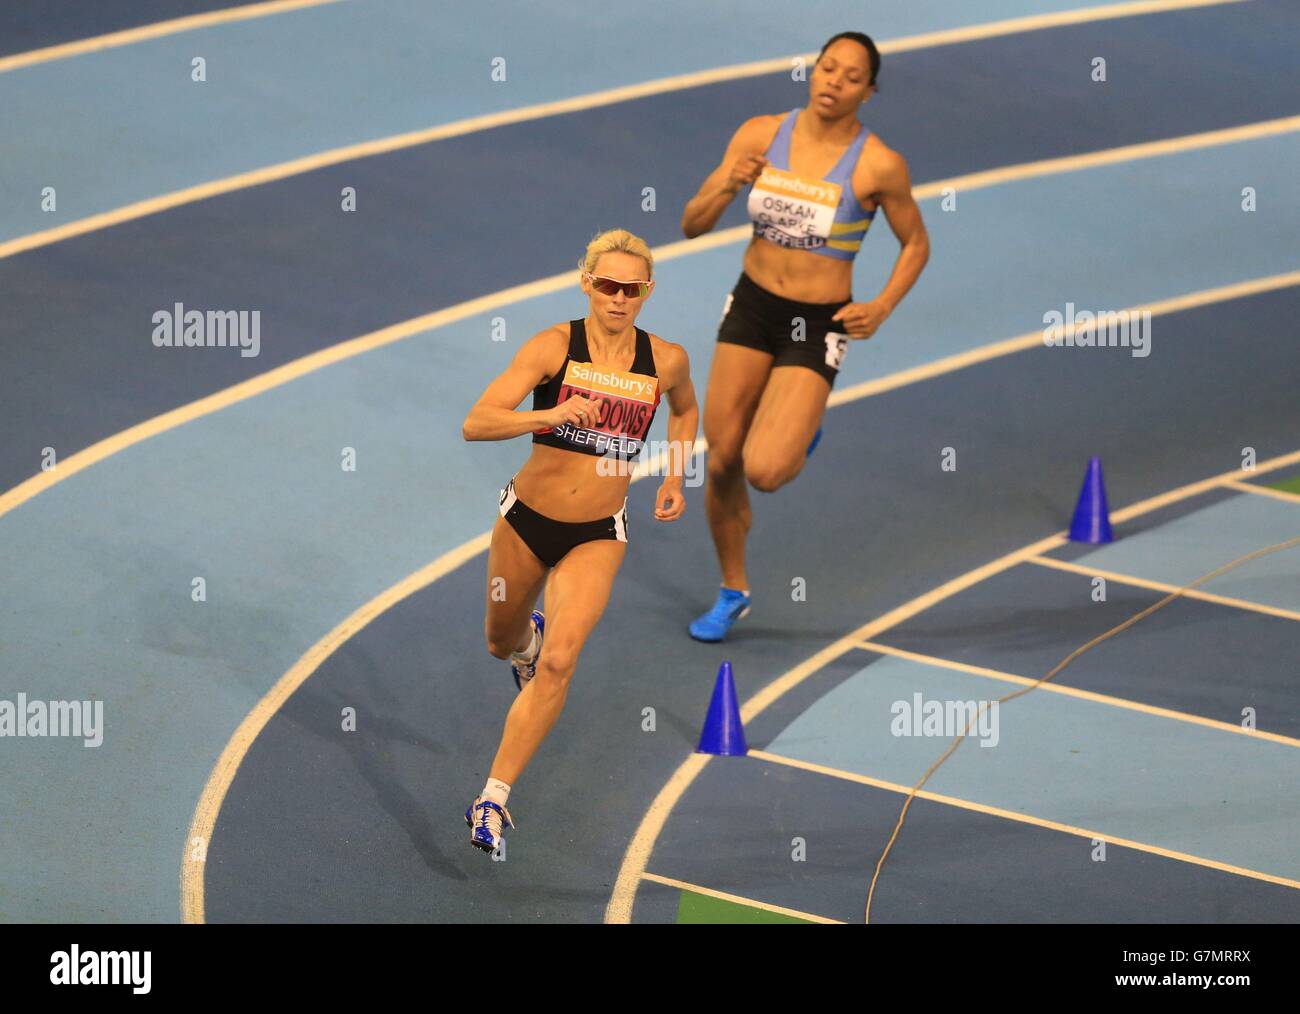 Jenny Meadows on her way to winning the womens 800m final during day two of the Sainsbury's British Indoor Championships at the English Institute of Sport, Sheffield. Stock Photo